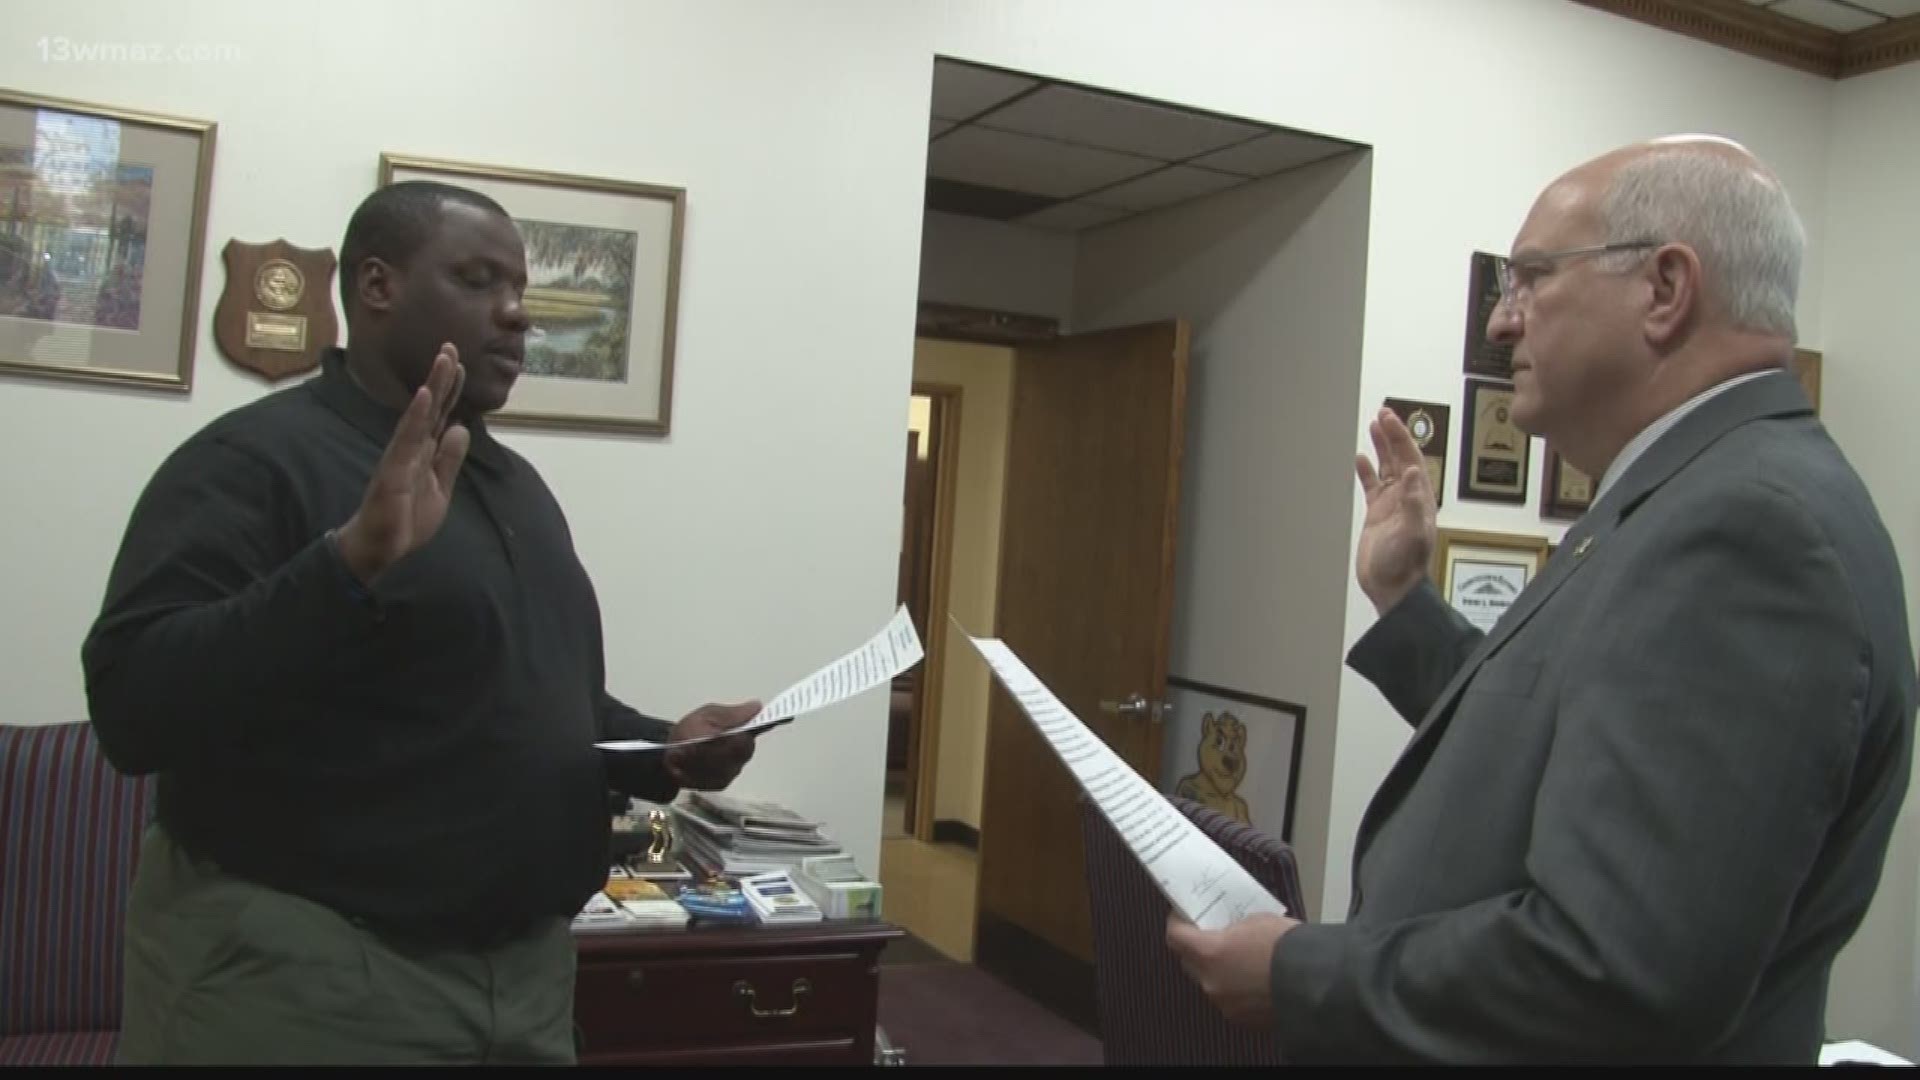 The Bibb County Sheriff's Office is asking county commissioners for permission to start a new incentive program to give deputies some extra cash.